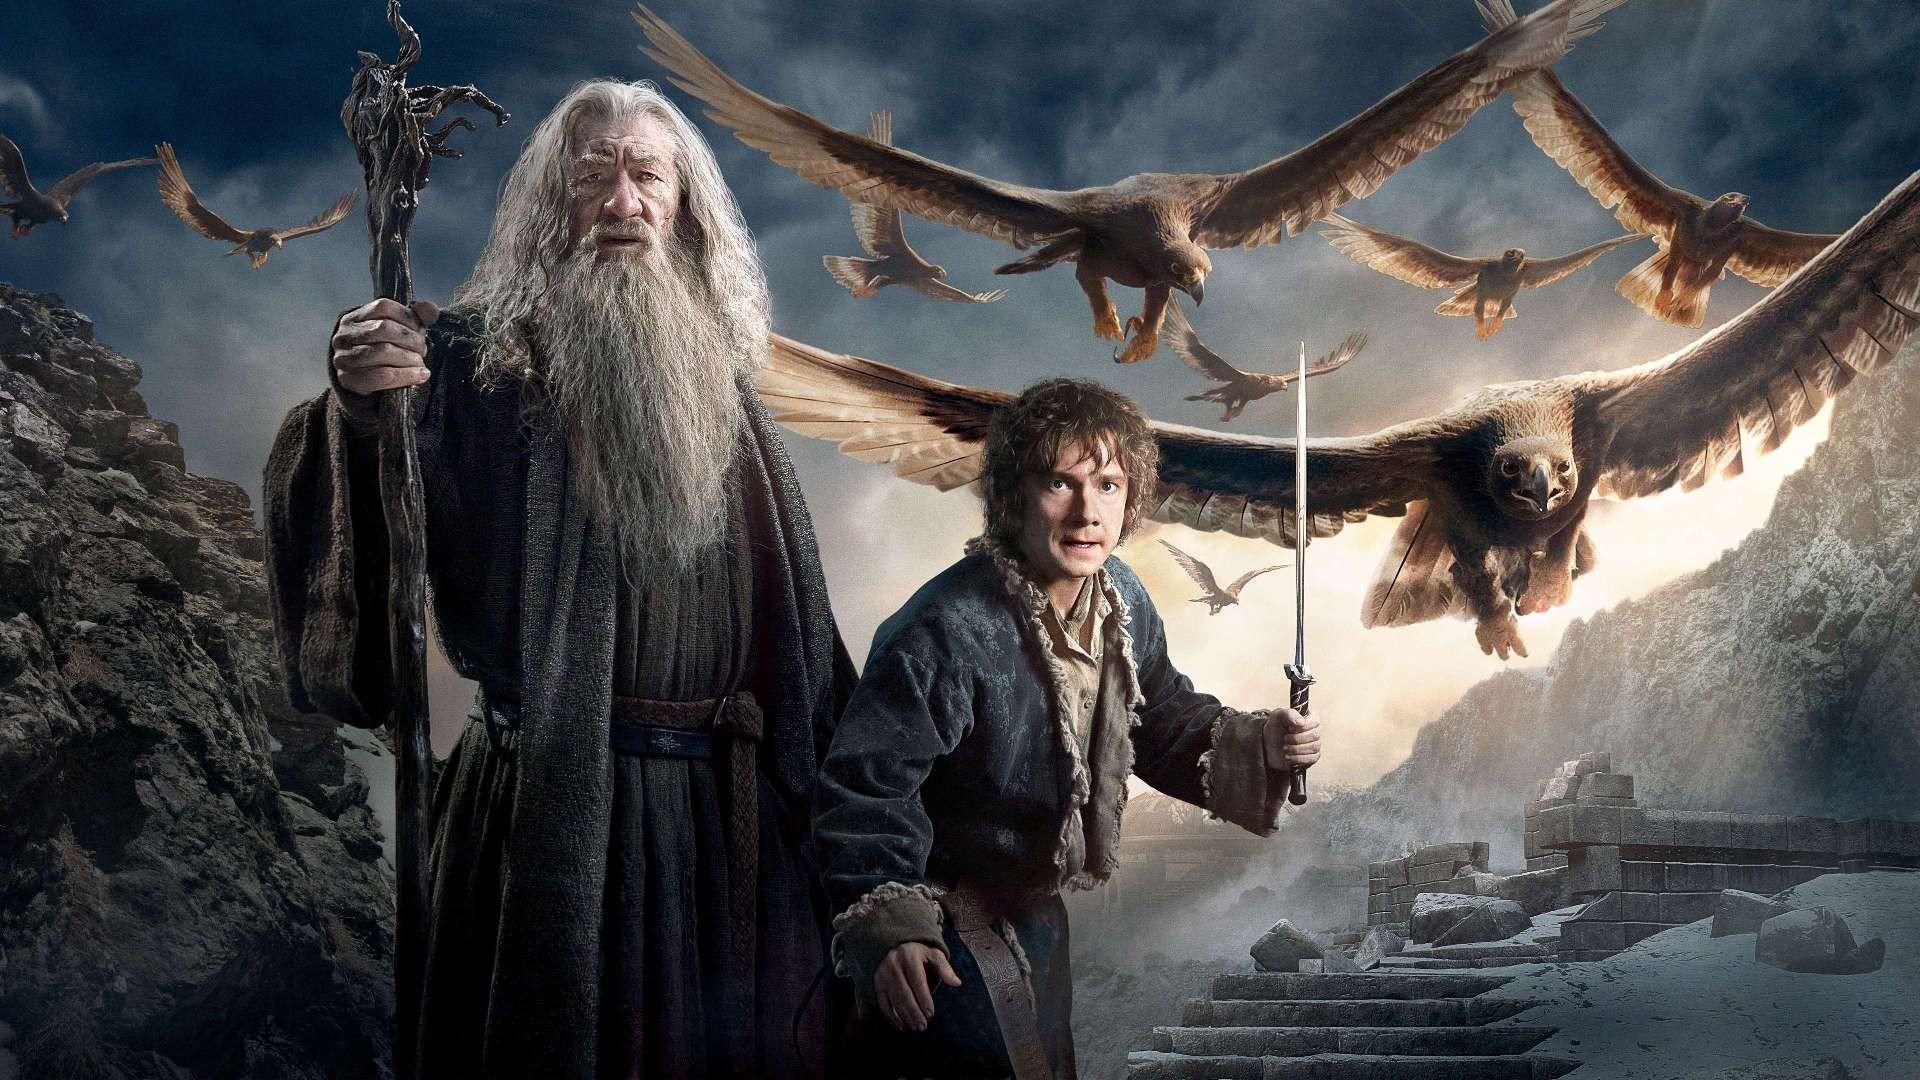 The Hobbit: The Battle of the Five Ar free